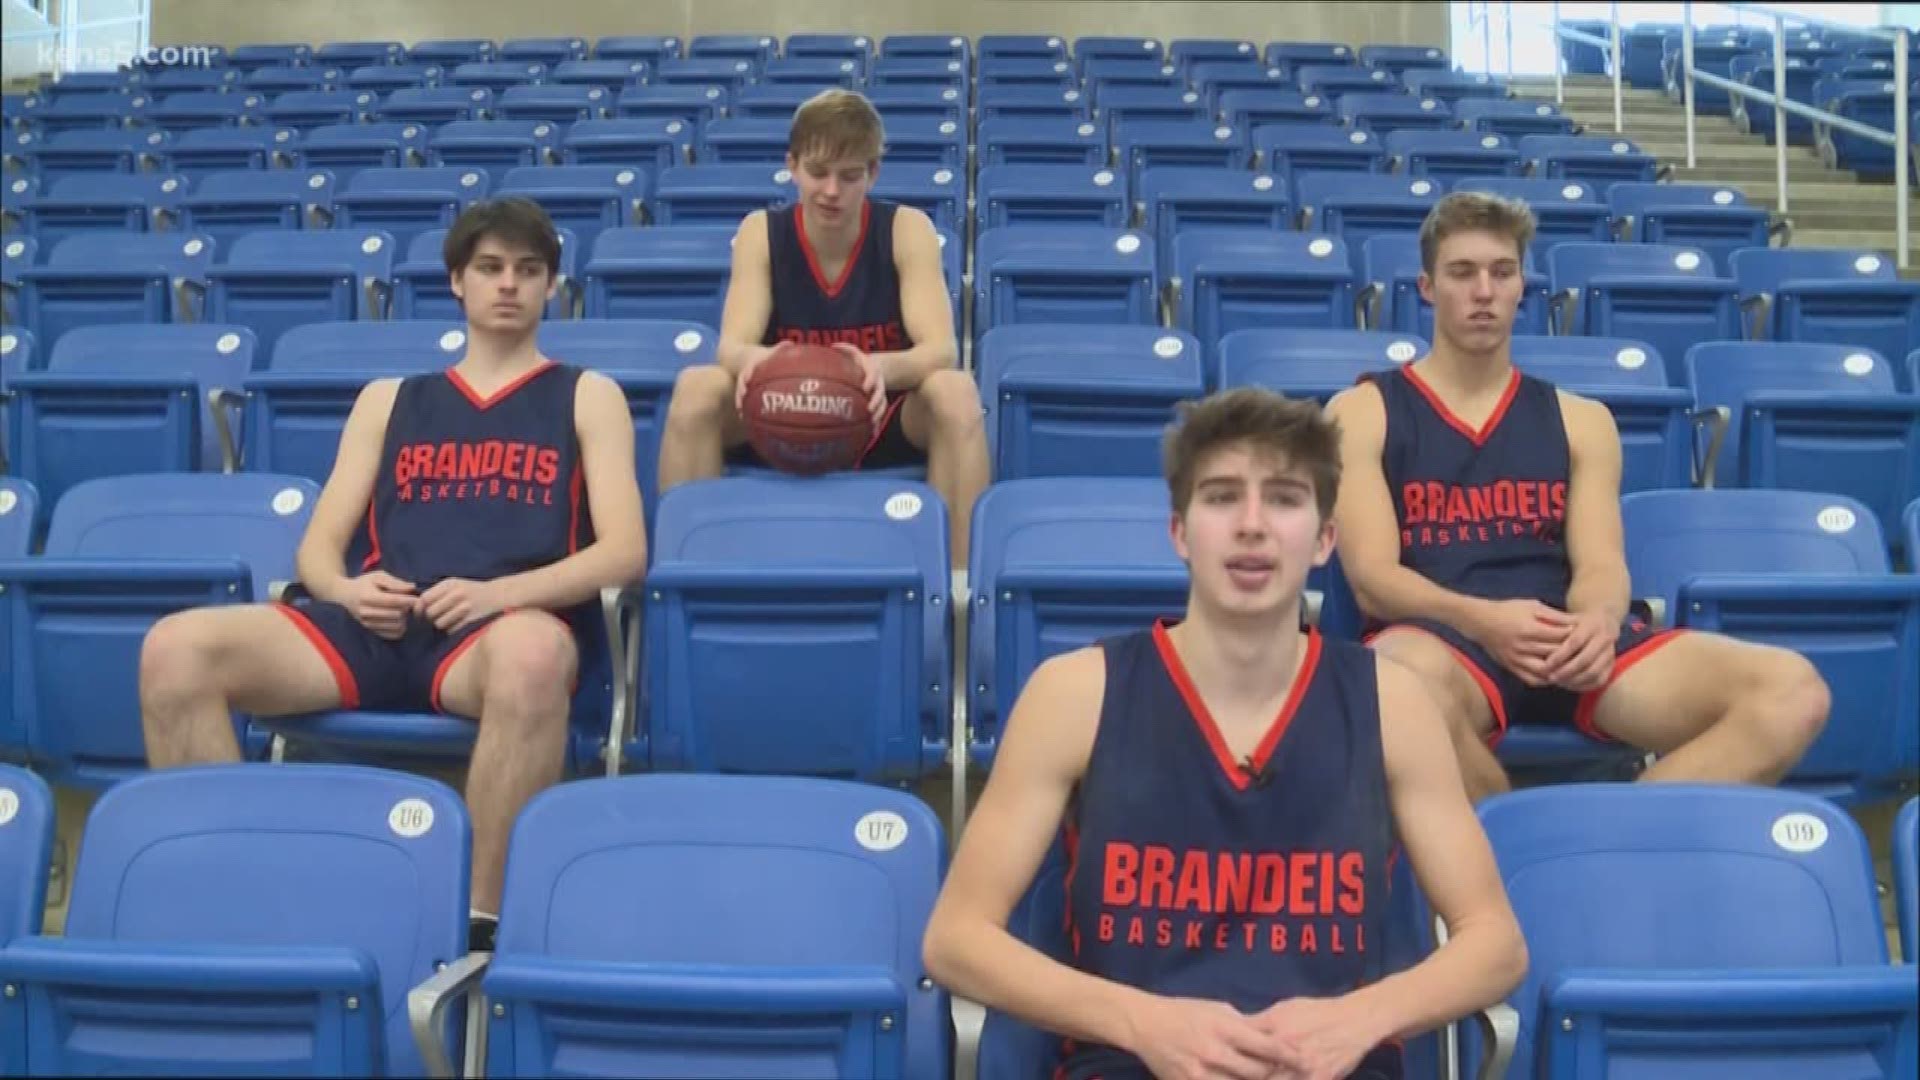 Brandeis and Wagner were two local prep teams preparing to take the court this weekend. Now that won't happen.